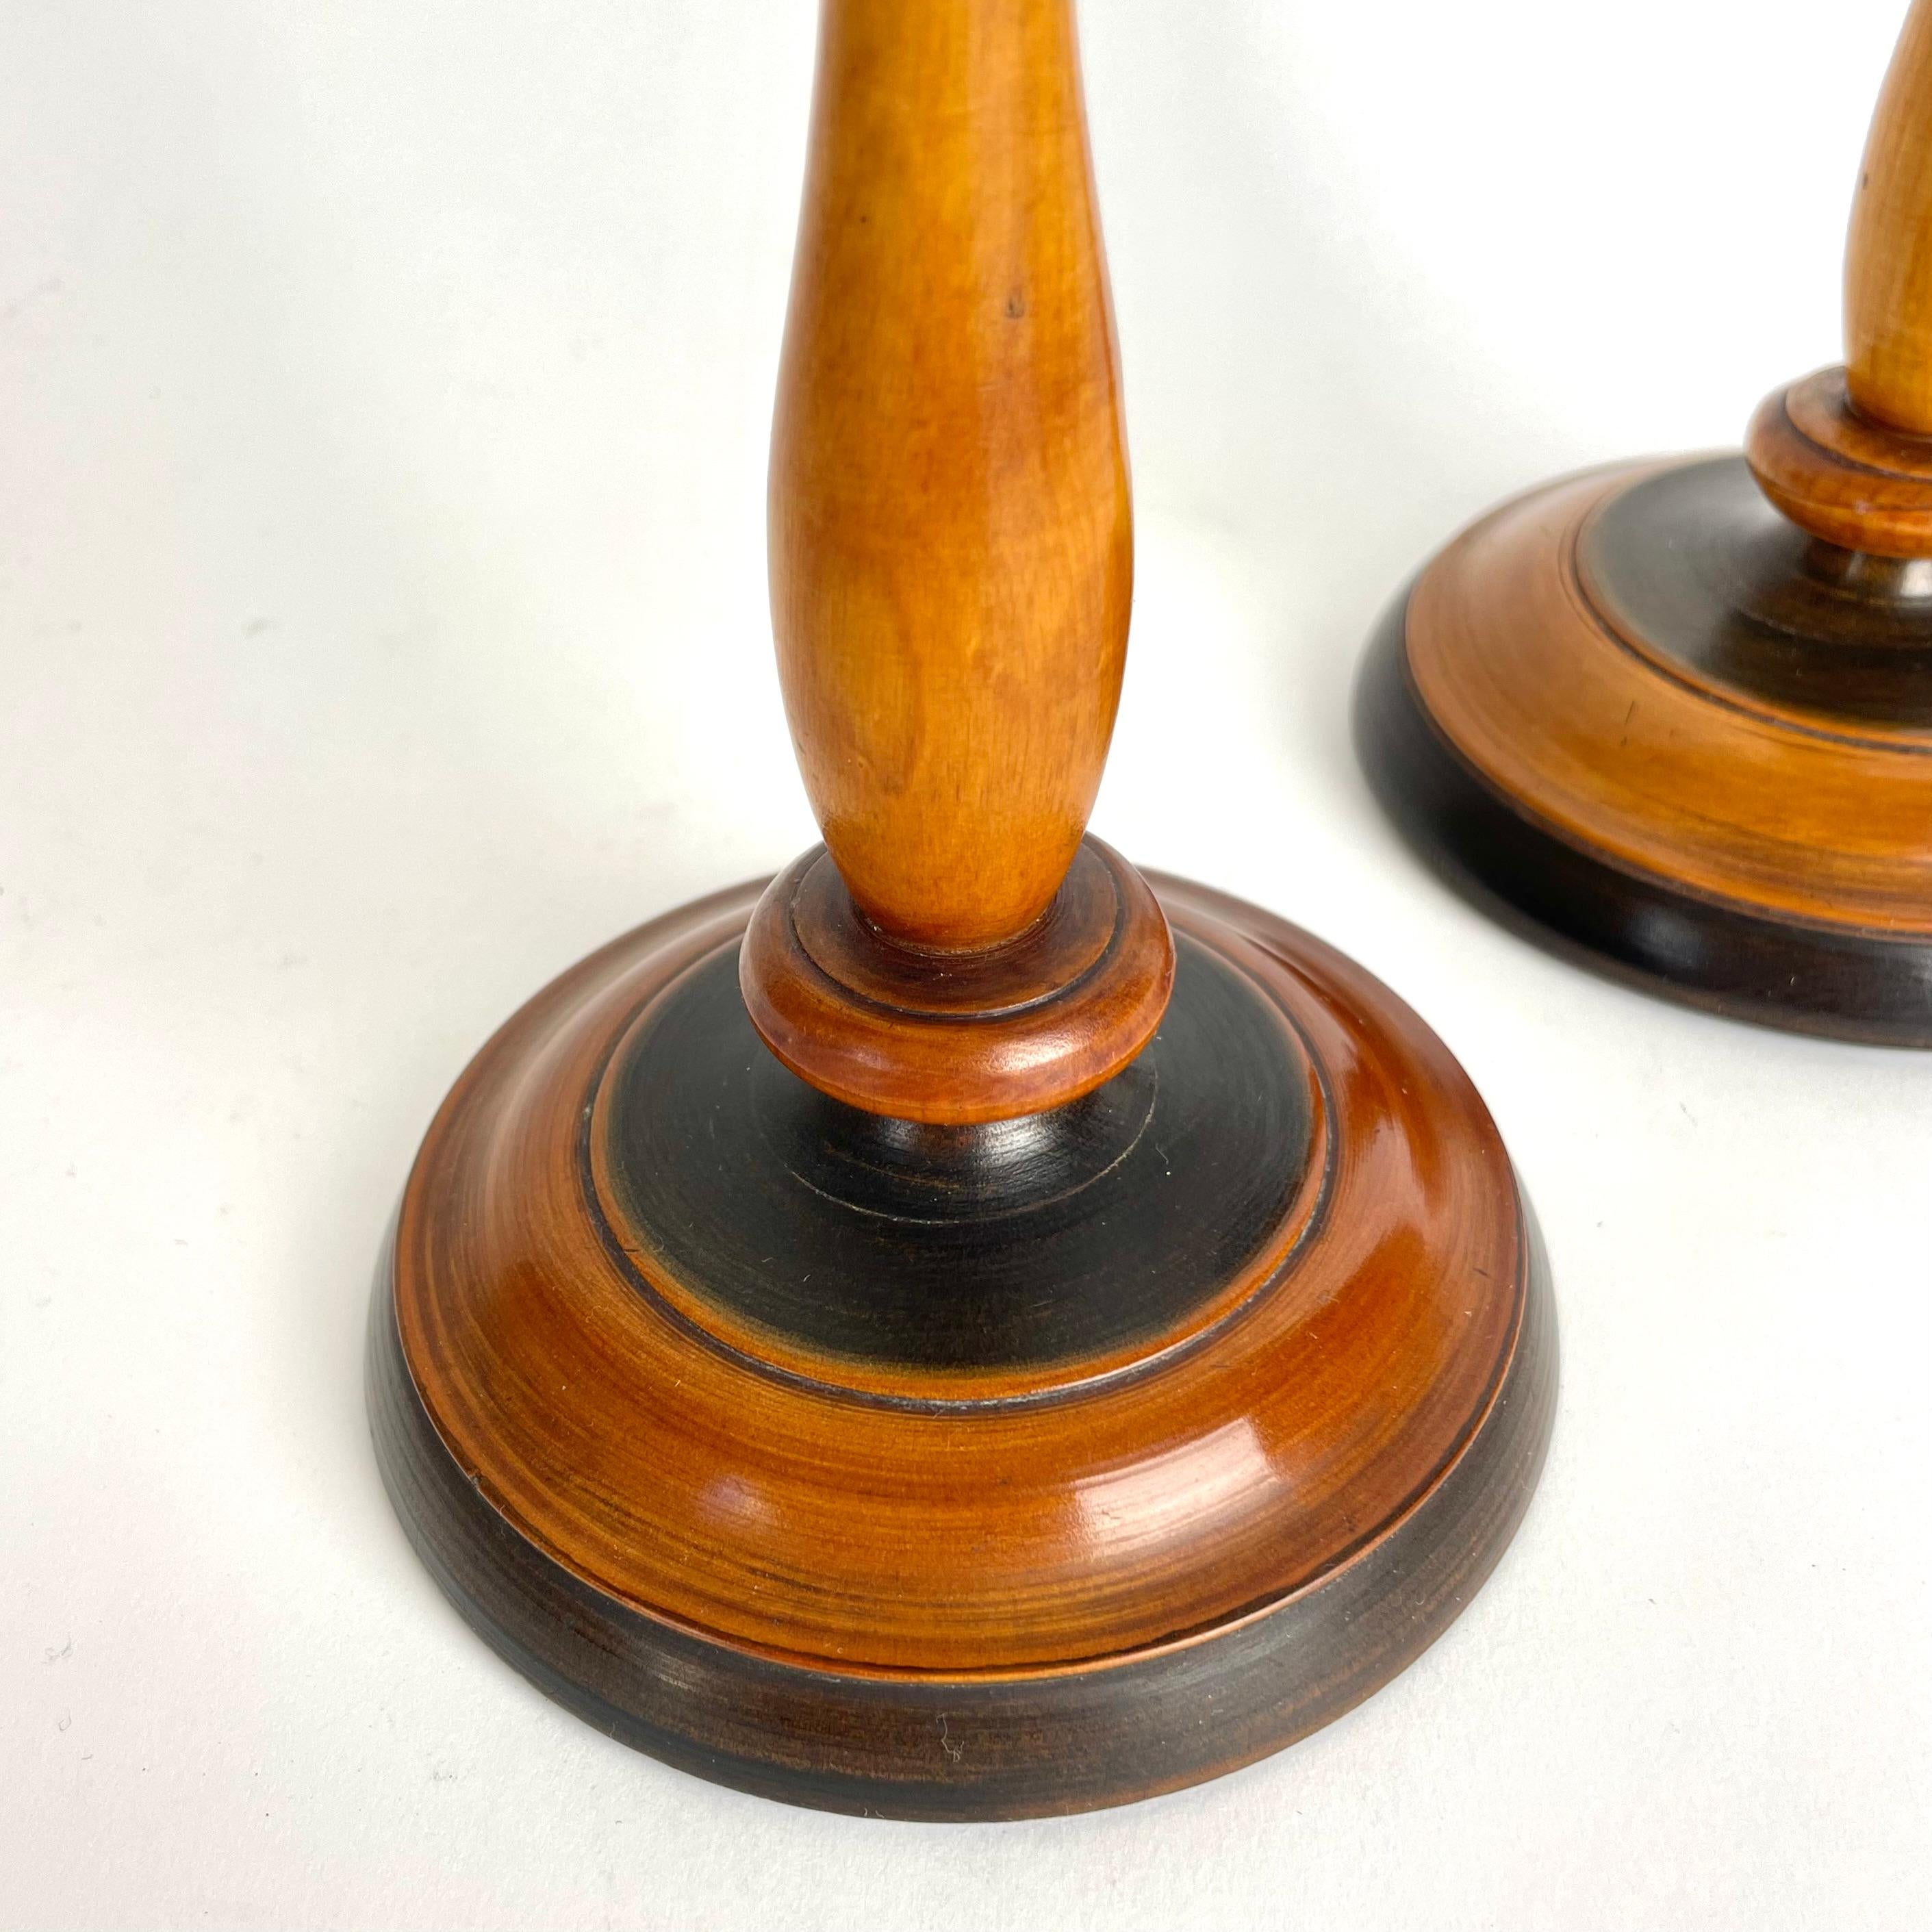 Pair of Birch Candlesticks in Swedish Karl-Johan from the 1820s-1830s In Good Condition For Sale In Knivsta, SE